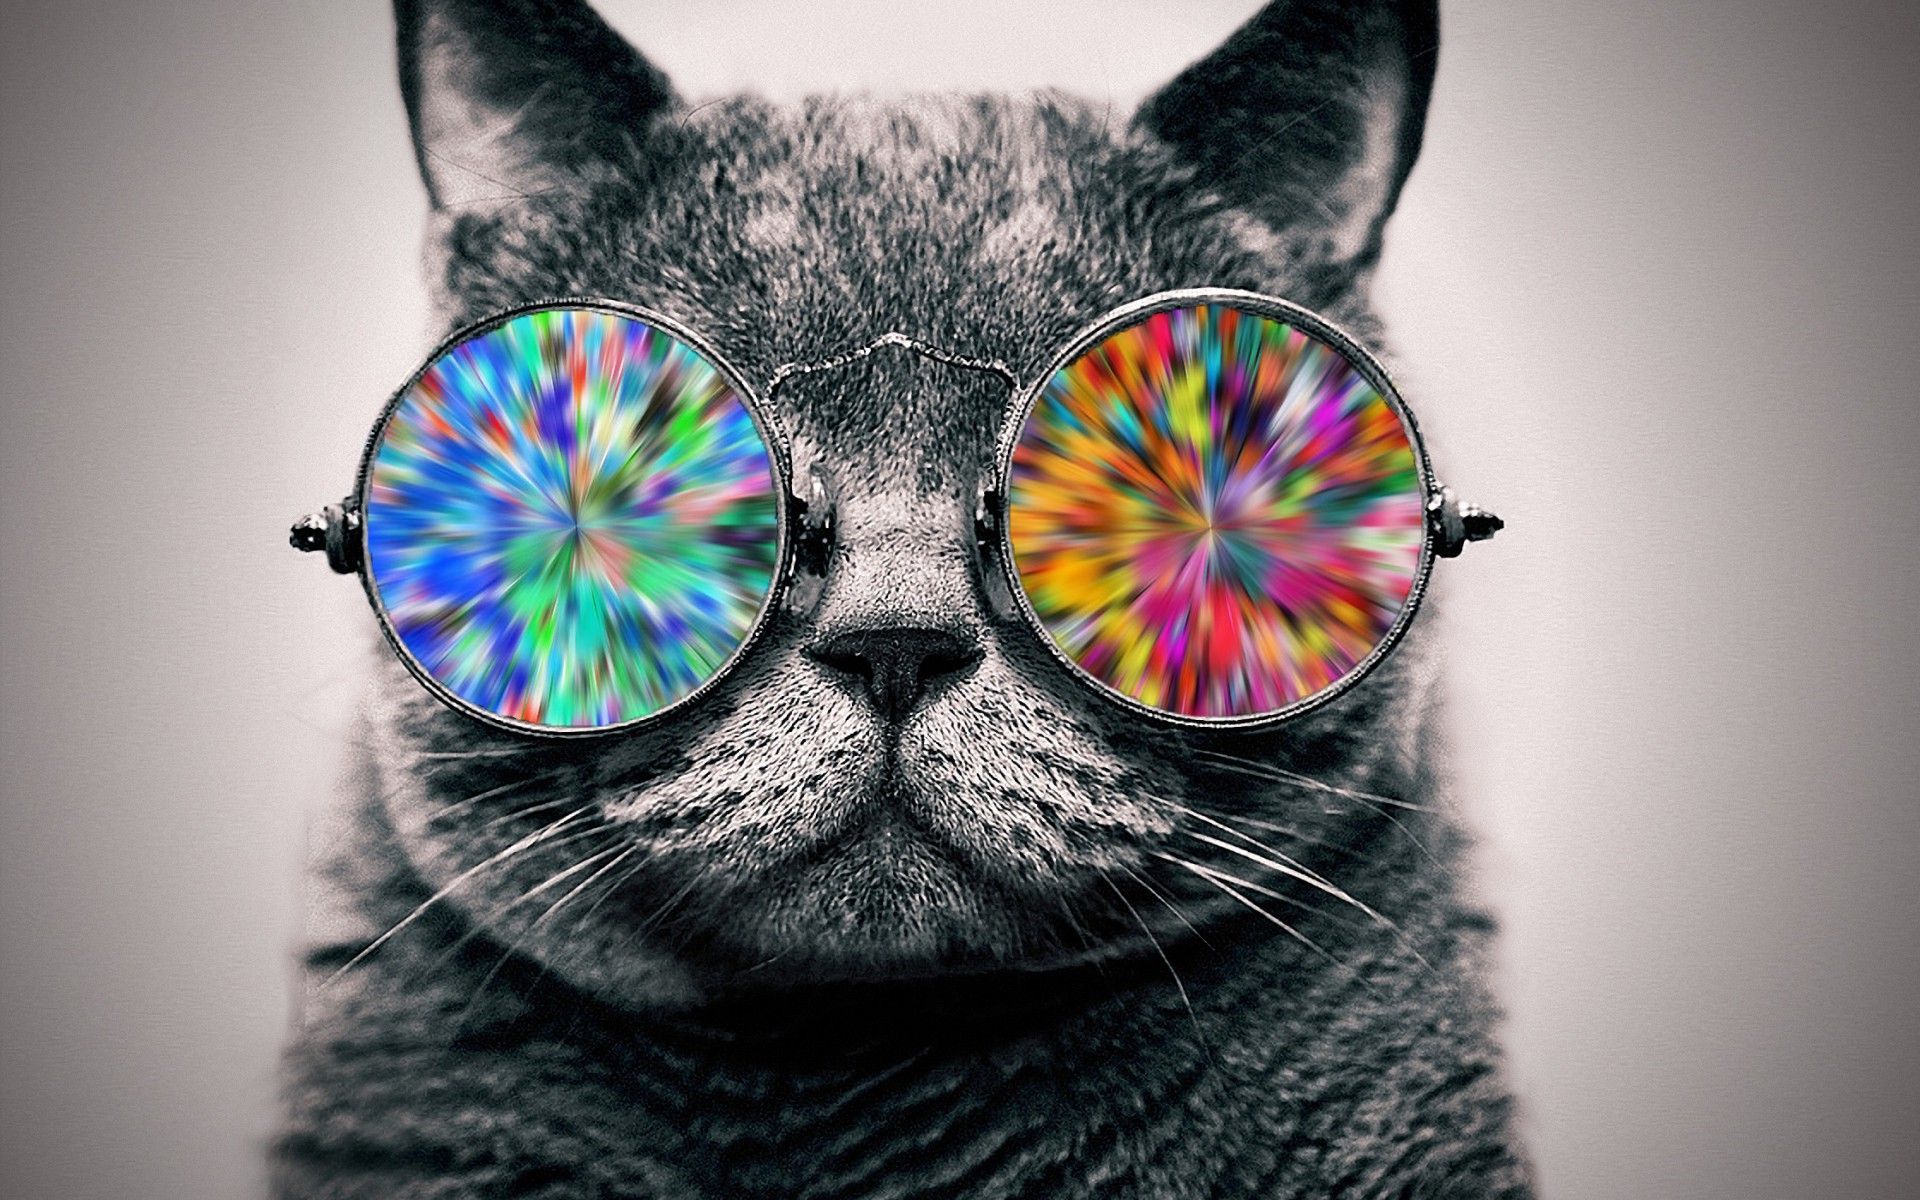 Cat With Sunglasses Wallpapers